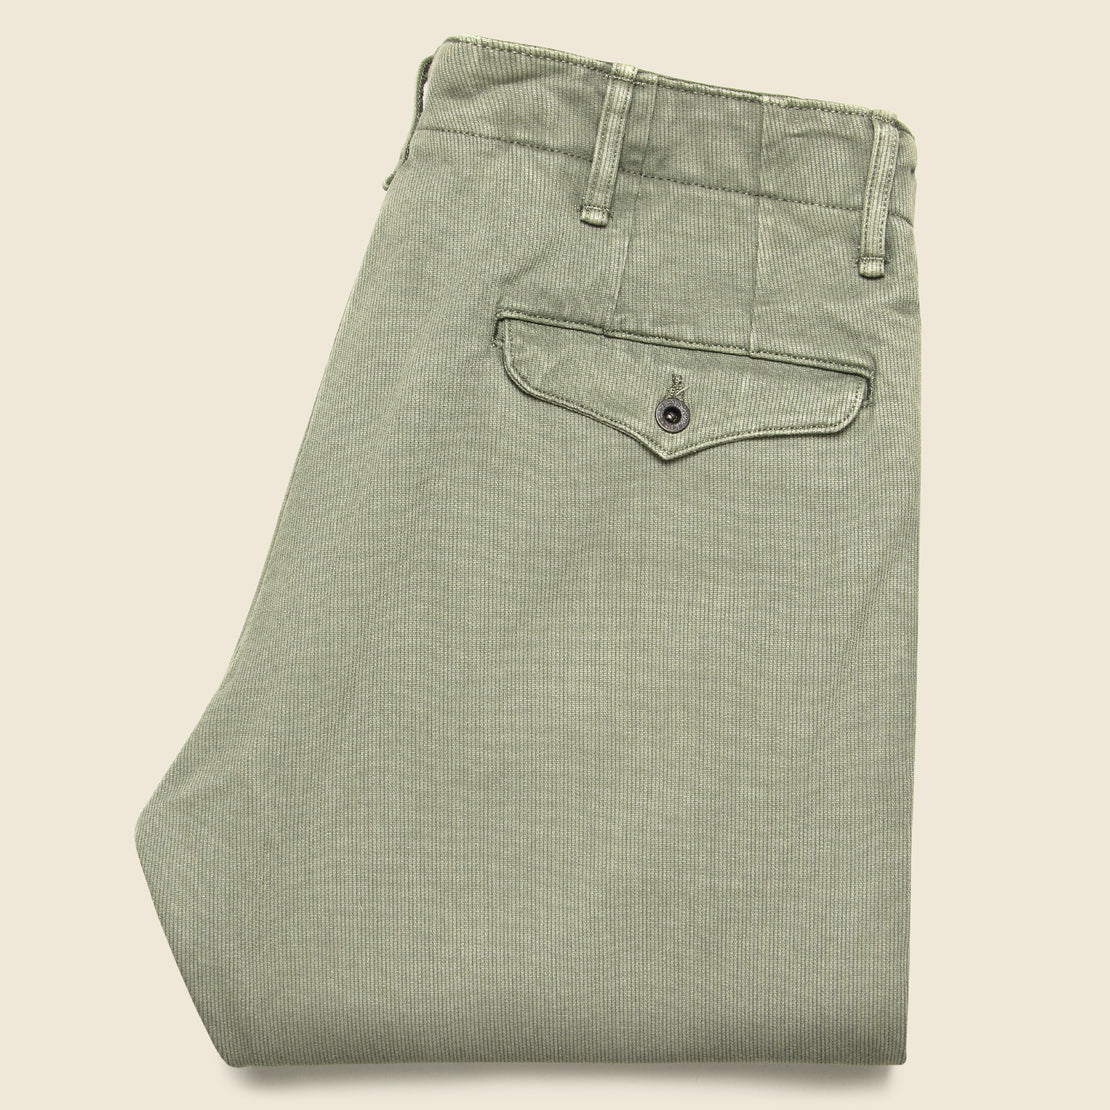 Officer Chino - Faded Teal - RRL - STAG Provisions - Pants - Twill